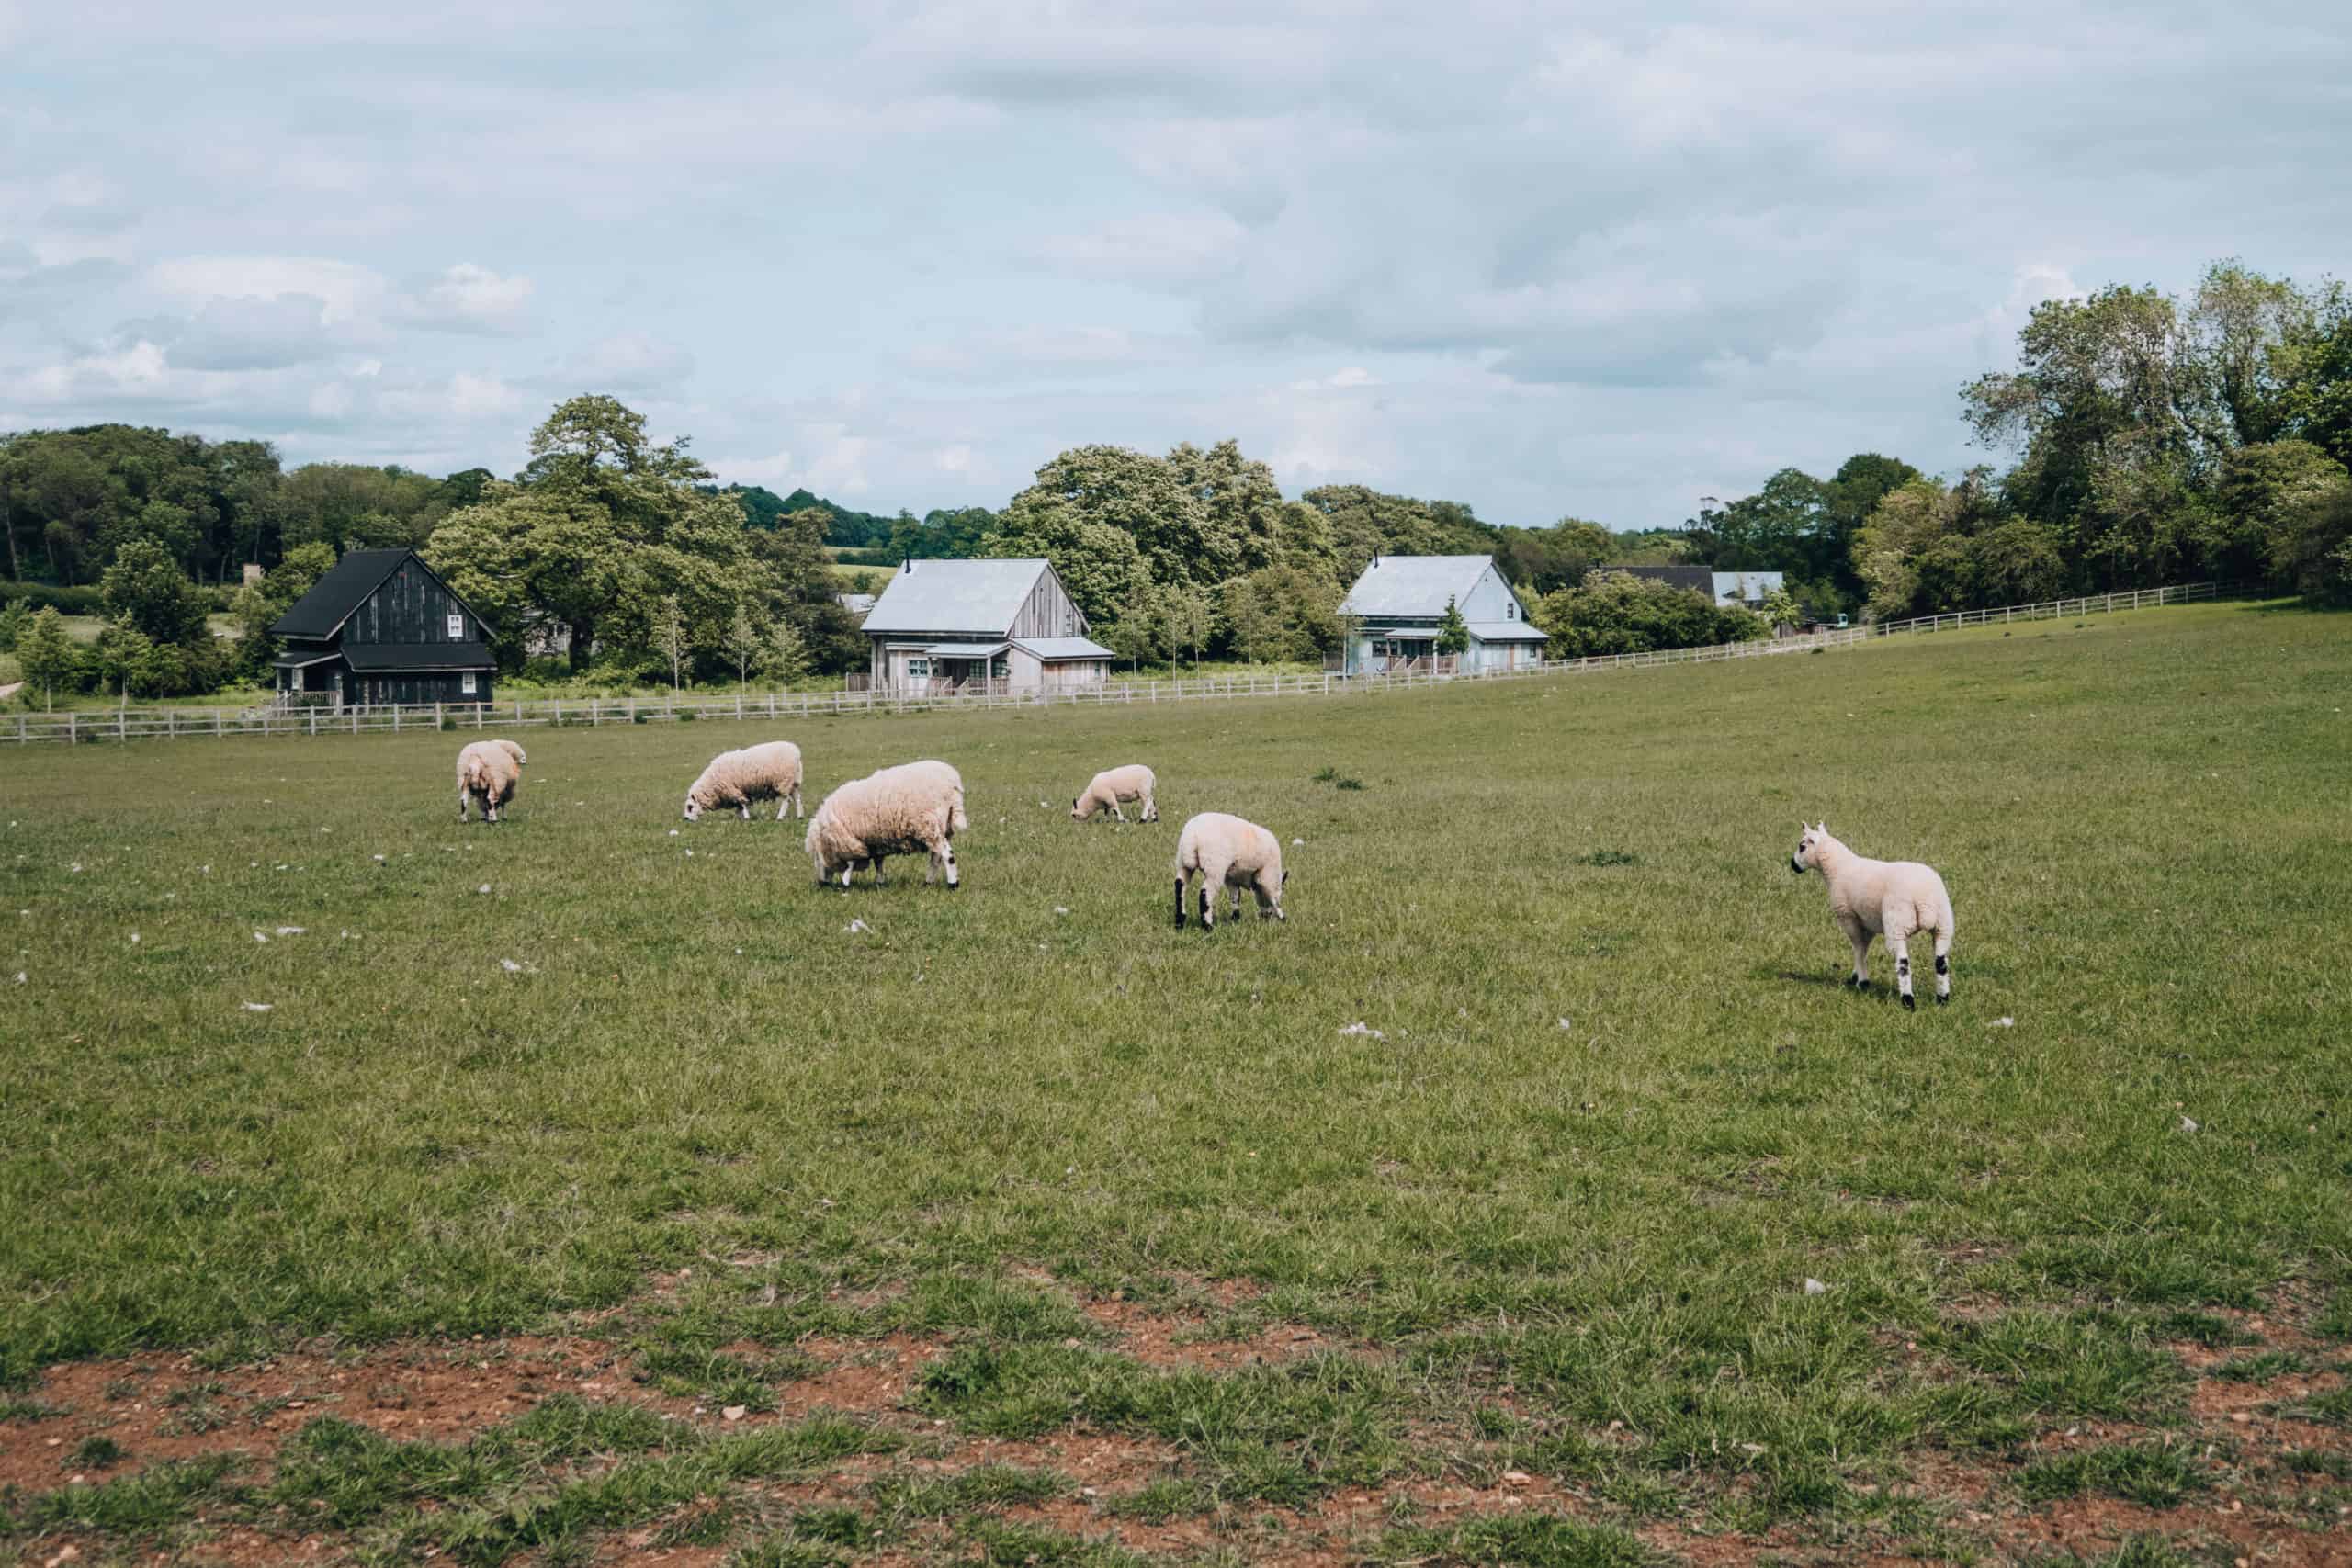 Sheep in the English Countryside | The Cotswolds in 20 Photos